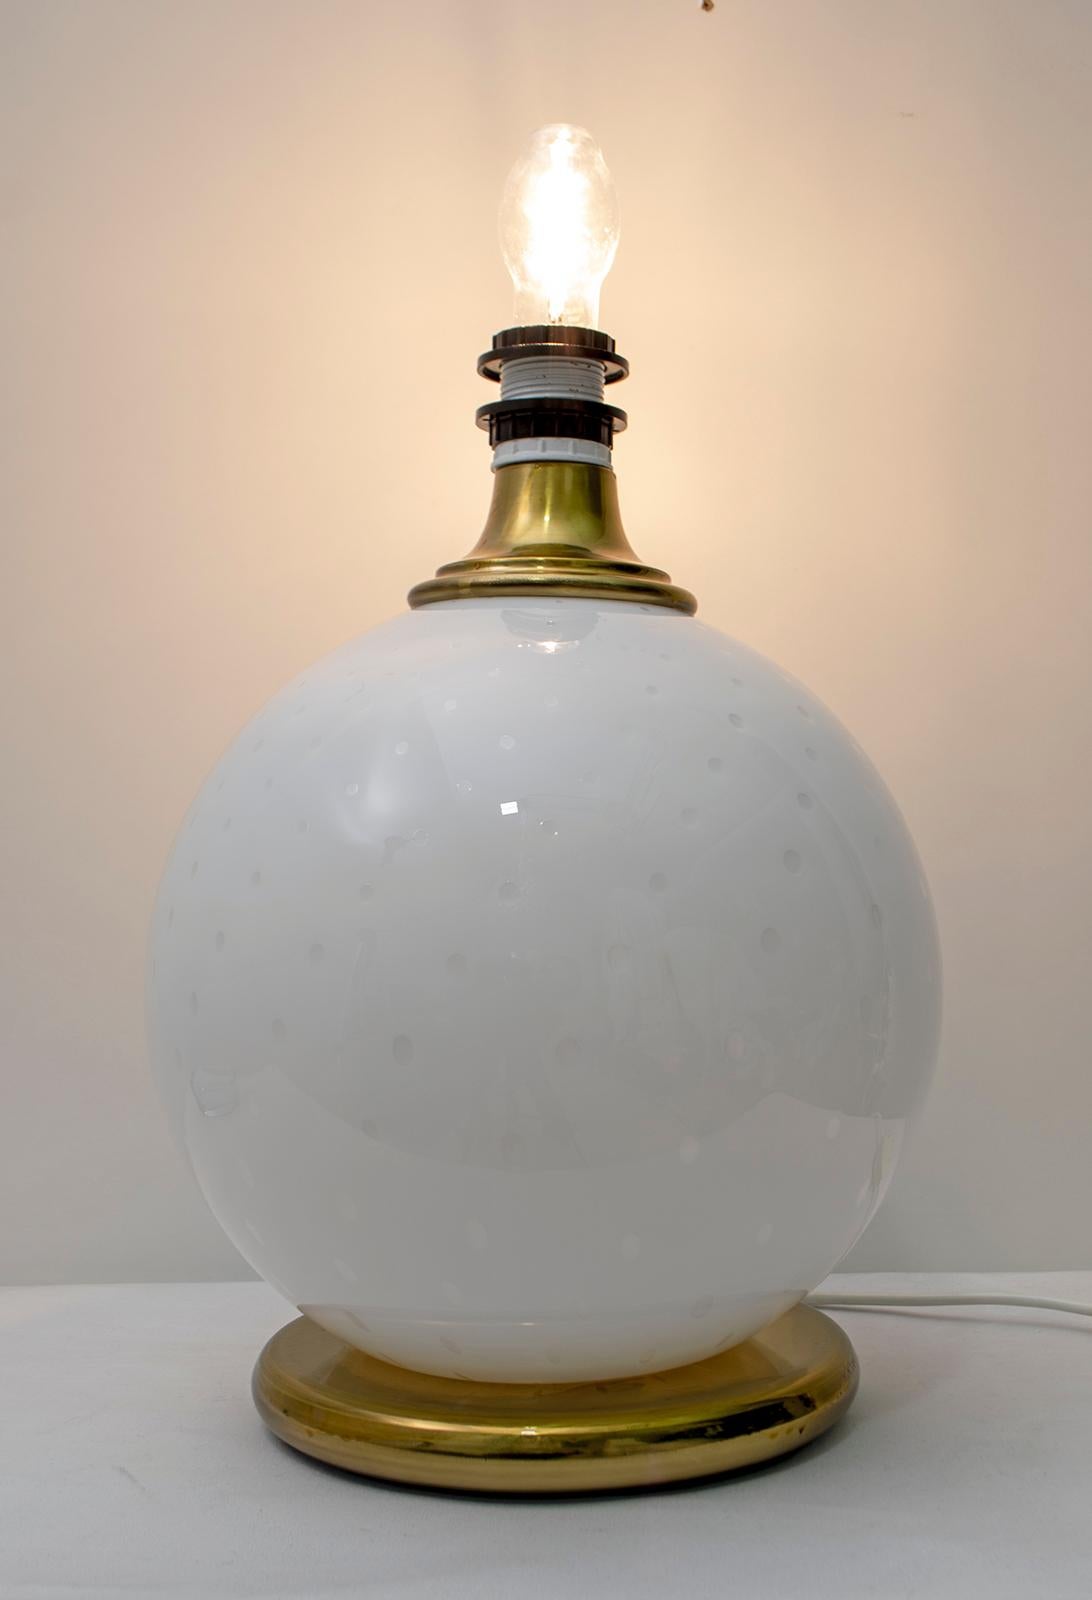 This lamp was created by Maestri Muranesi, with the blown glass technique with air bubbles, the two supports are made of brass, there is no lampshade (as in the photo). 1970s Italy.
 